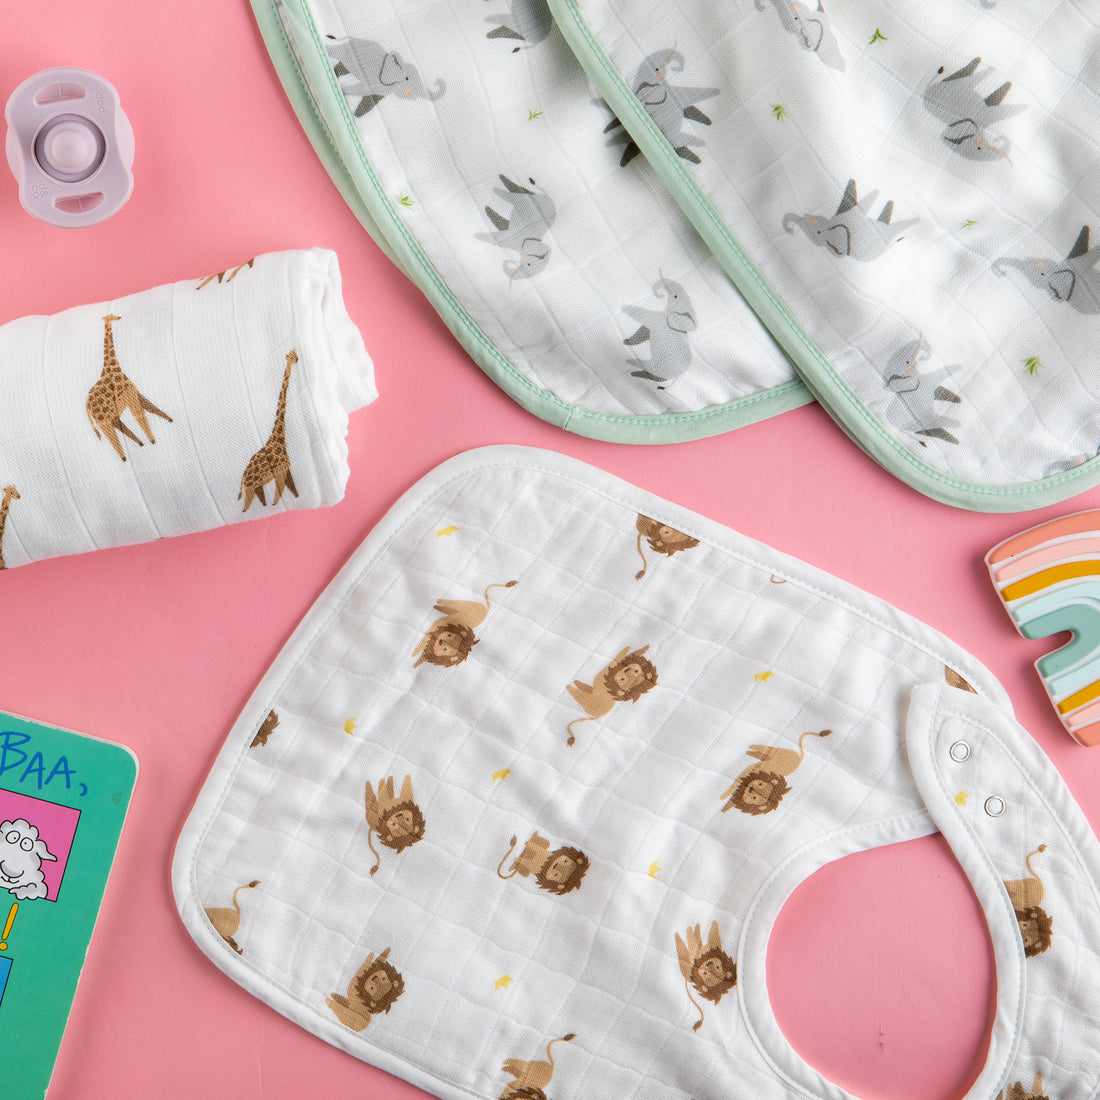 Baby Registry Essentials: All the Fun Stuff and Why You Need It